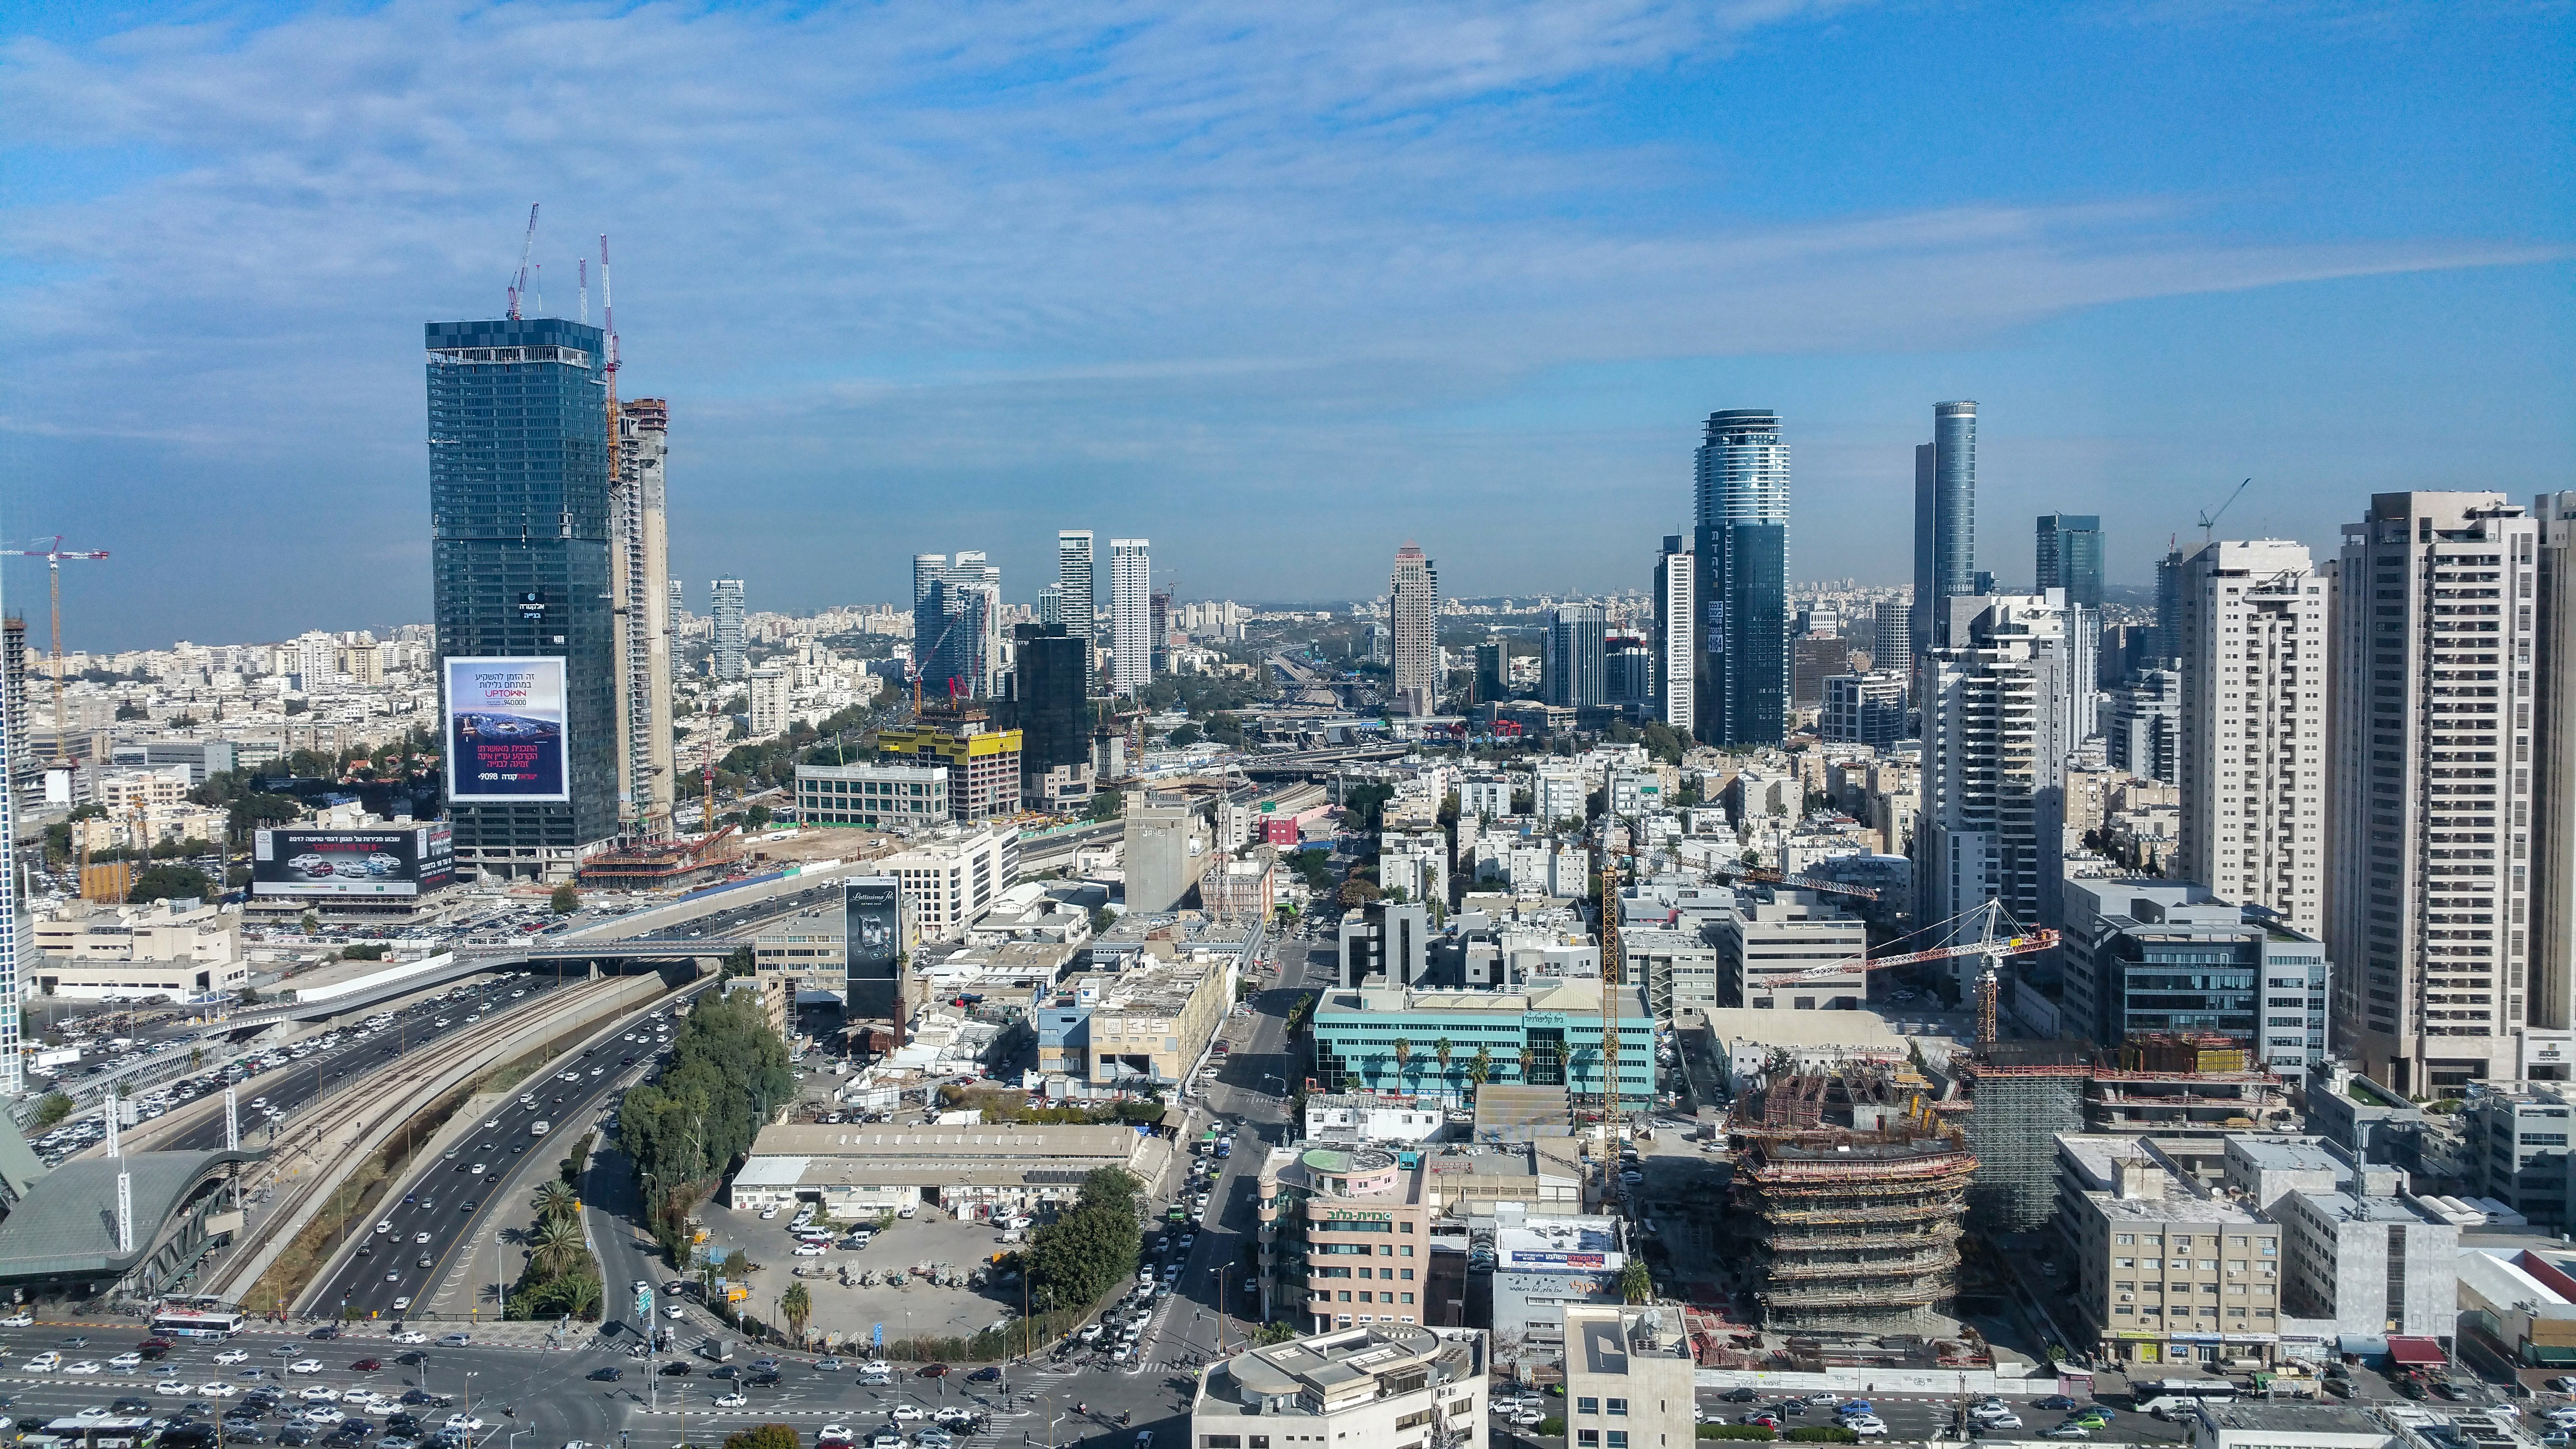 Urban Cityscape with buildings in Tel-Aviv, Israel image - Free ...